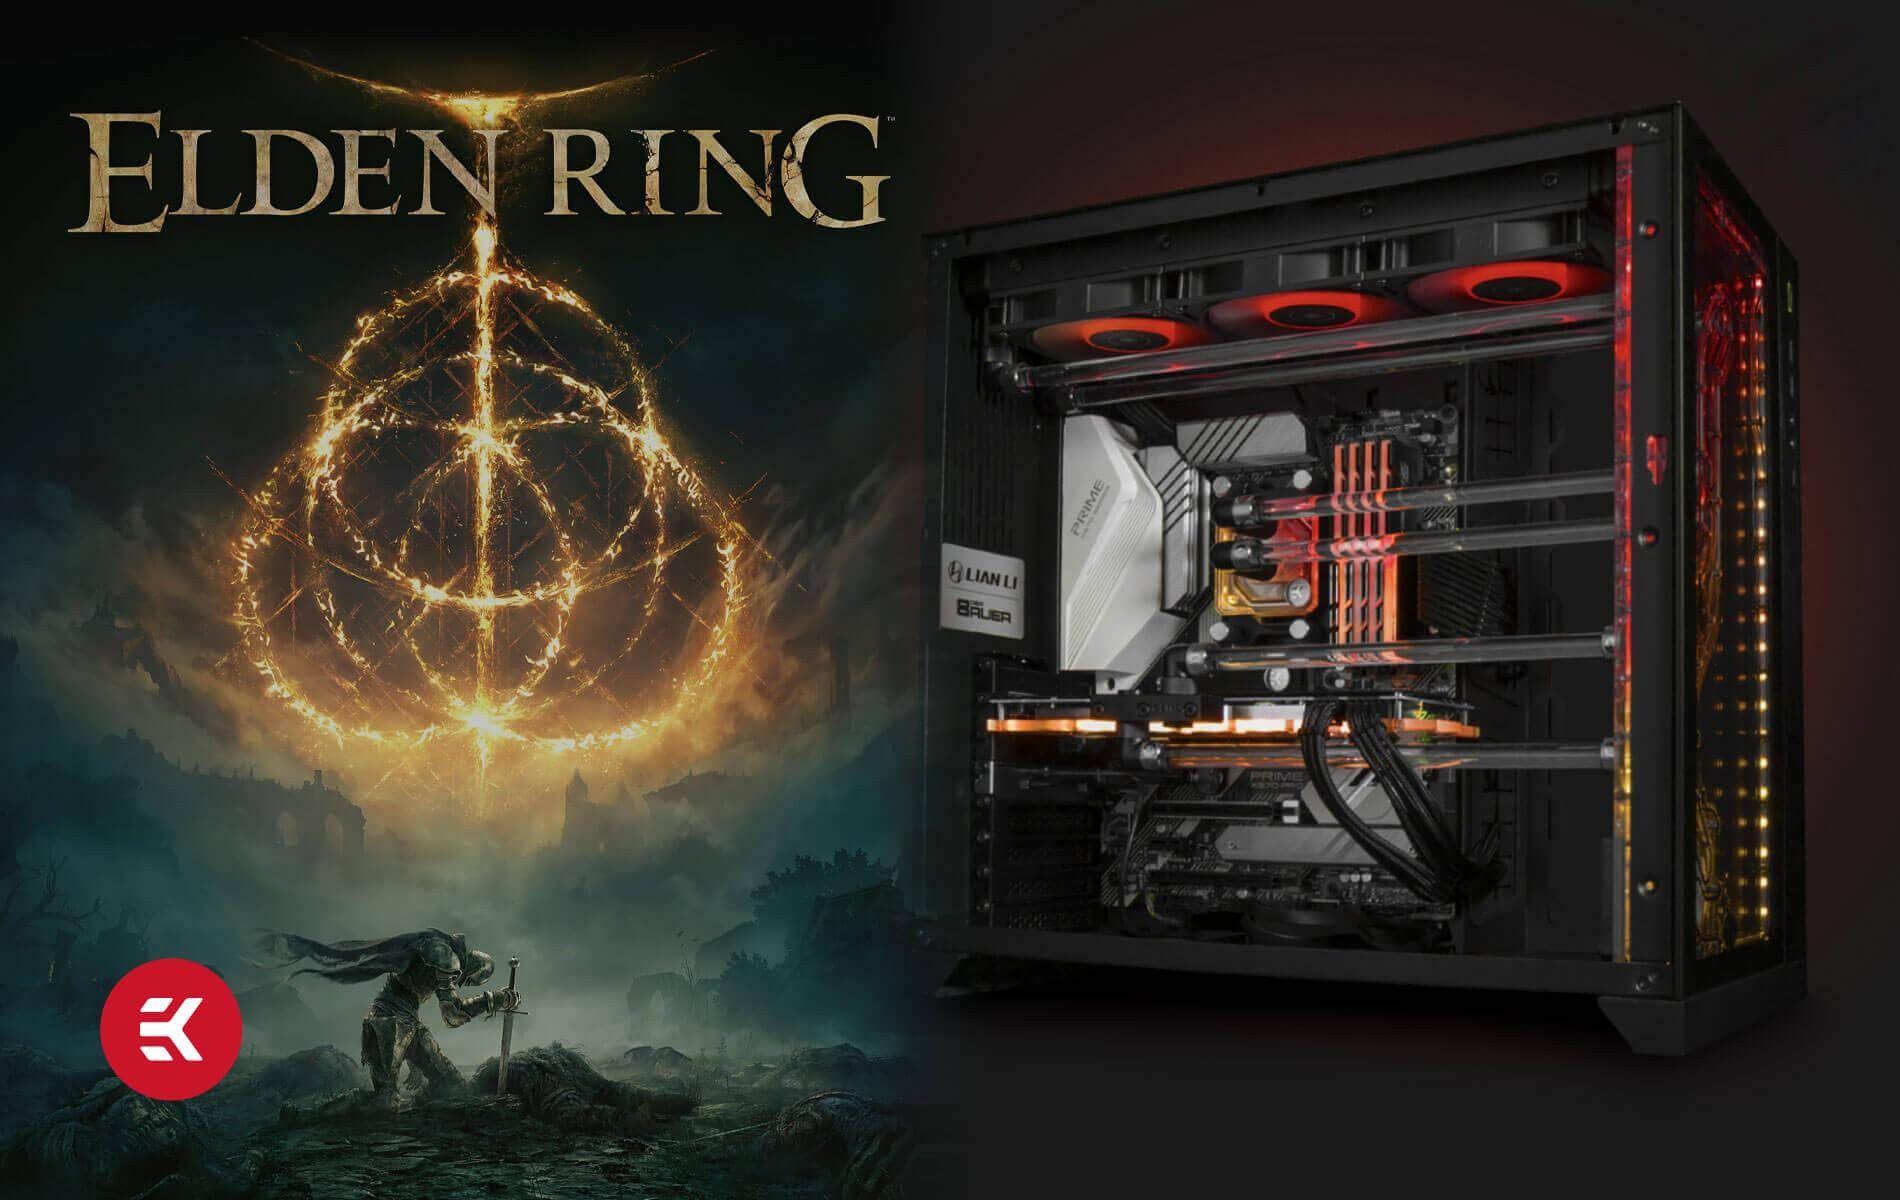 Elden Ring system requirements - Minimum and recommended PC specs